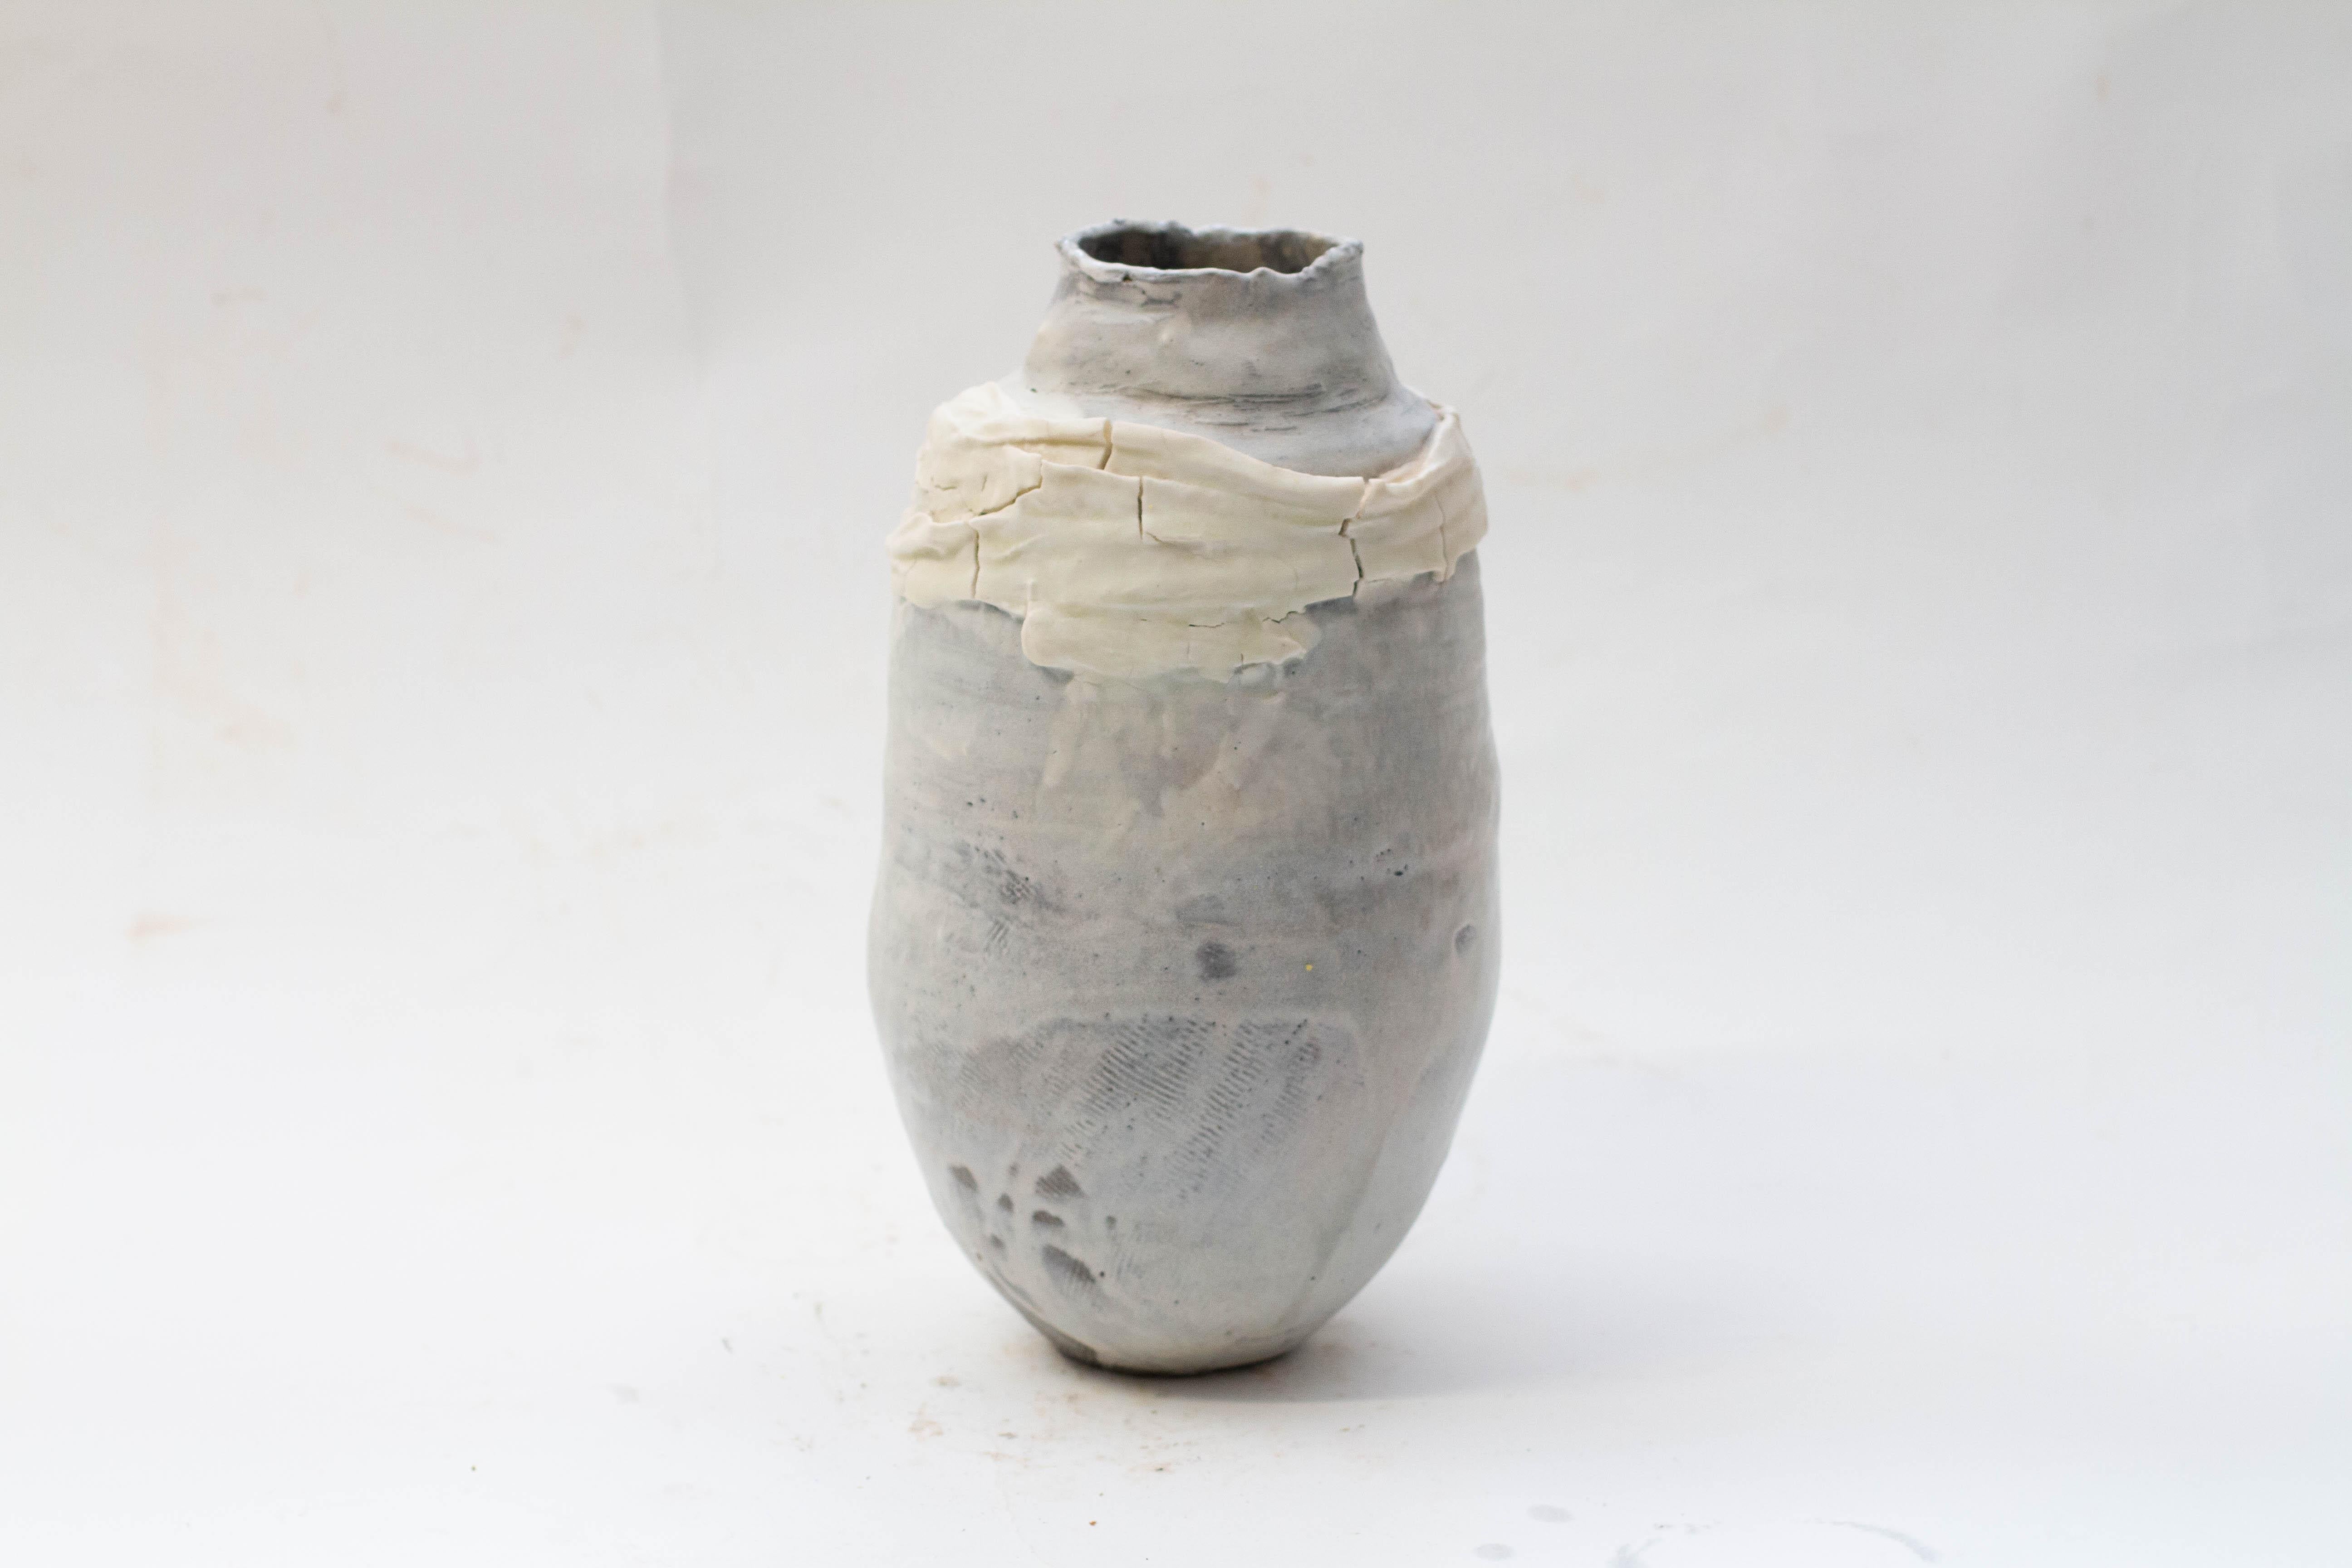 Three wheel thrown vessels altered by hand, in anthracite grey clay, washed with porcelain and garlanded with veils of porcelain. This trio was conceived at the start of lockdown. My work usually starts from an anthropomorphic perspective, in